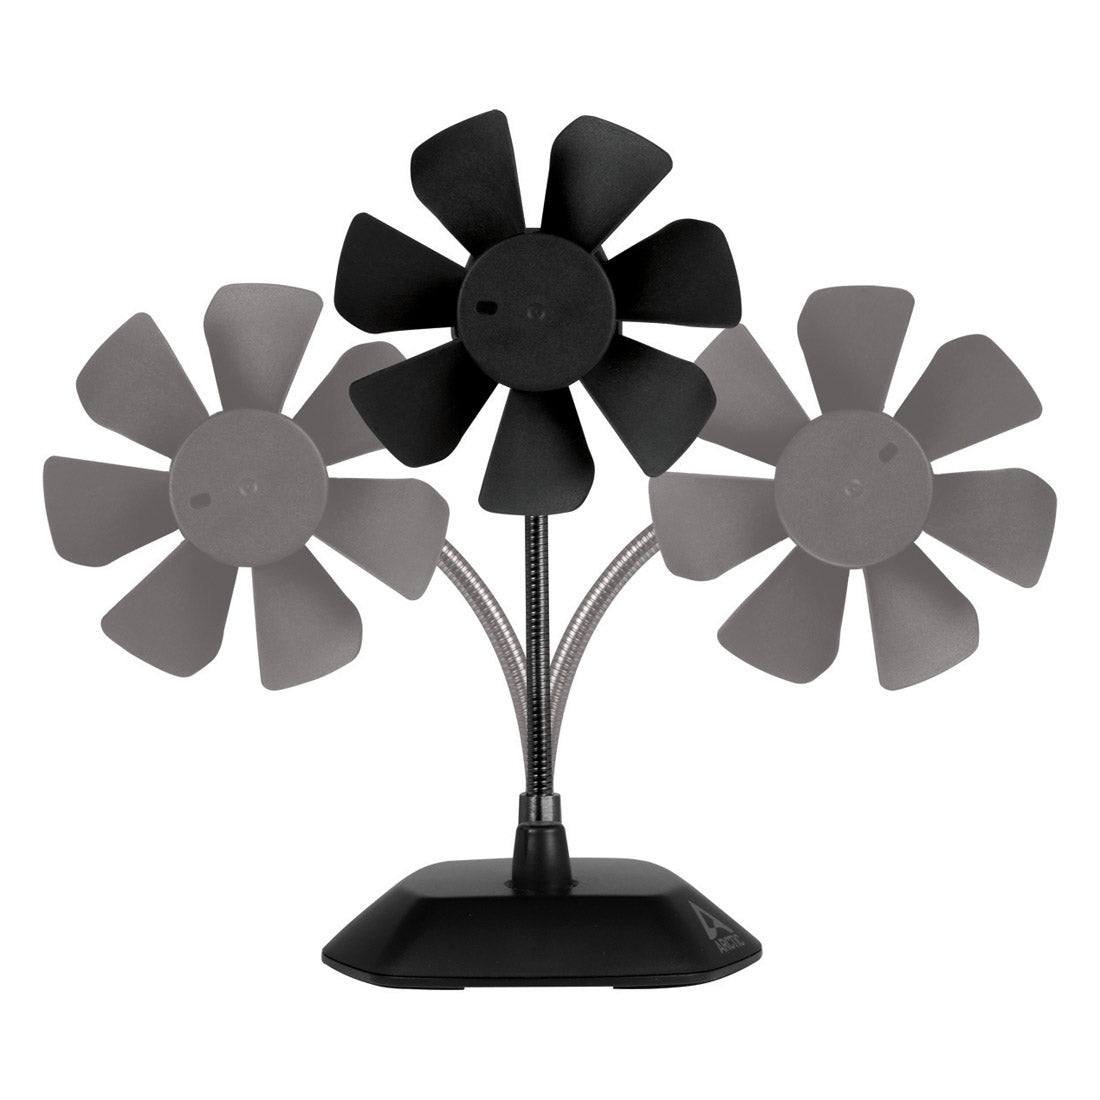 ARCTIC Breeze Color Portable USB Table Fan for Office and Laptop - Black